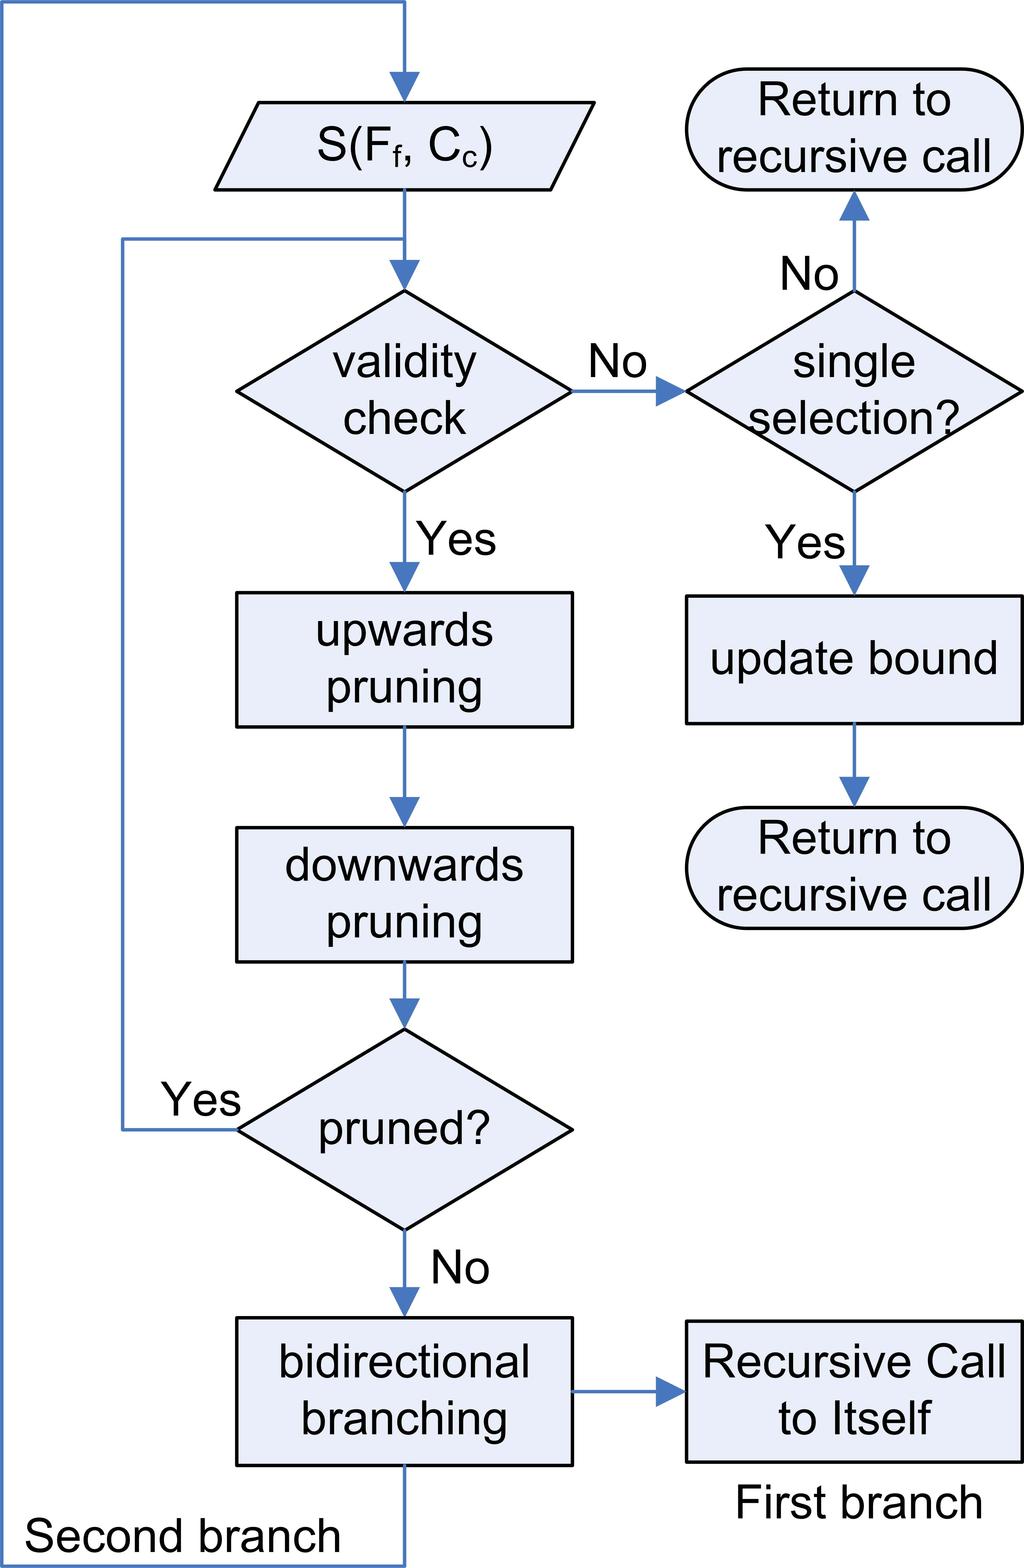 Figure 2: Flow chart of bidirectional branch and bound algorithm bidirectional BAB (B 3 ) algorithm, based on the principles of bidirectional pruning and branching using the determinant based